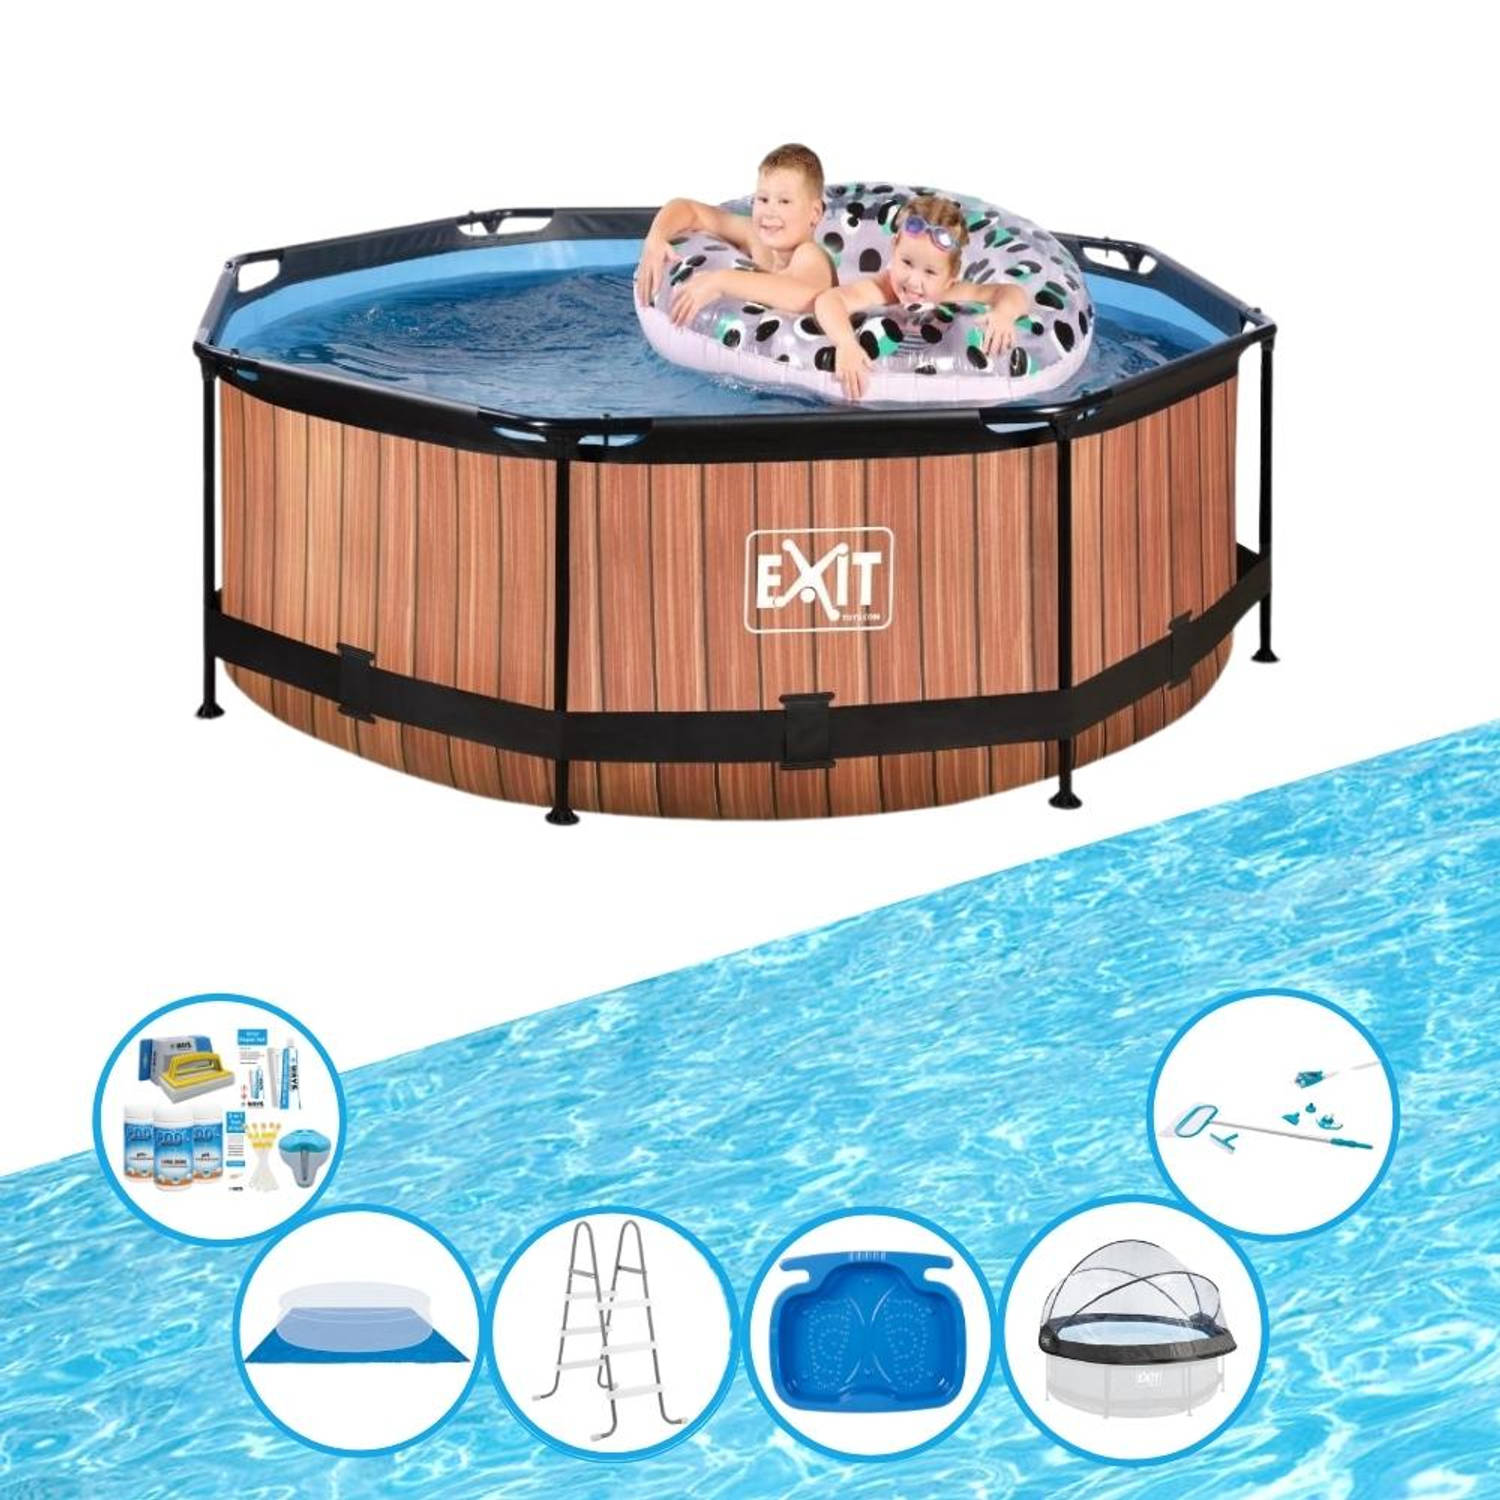 EXIT Toys Exit Zwembad Timber Style - ø244x76 Cm - Frame Pool - Zwembadset - Bruin